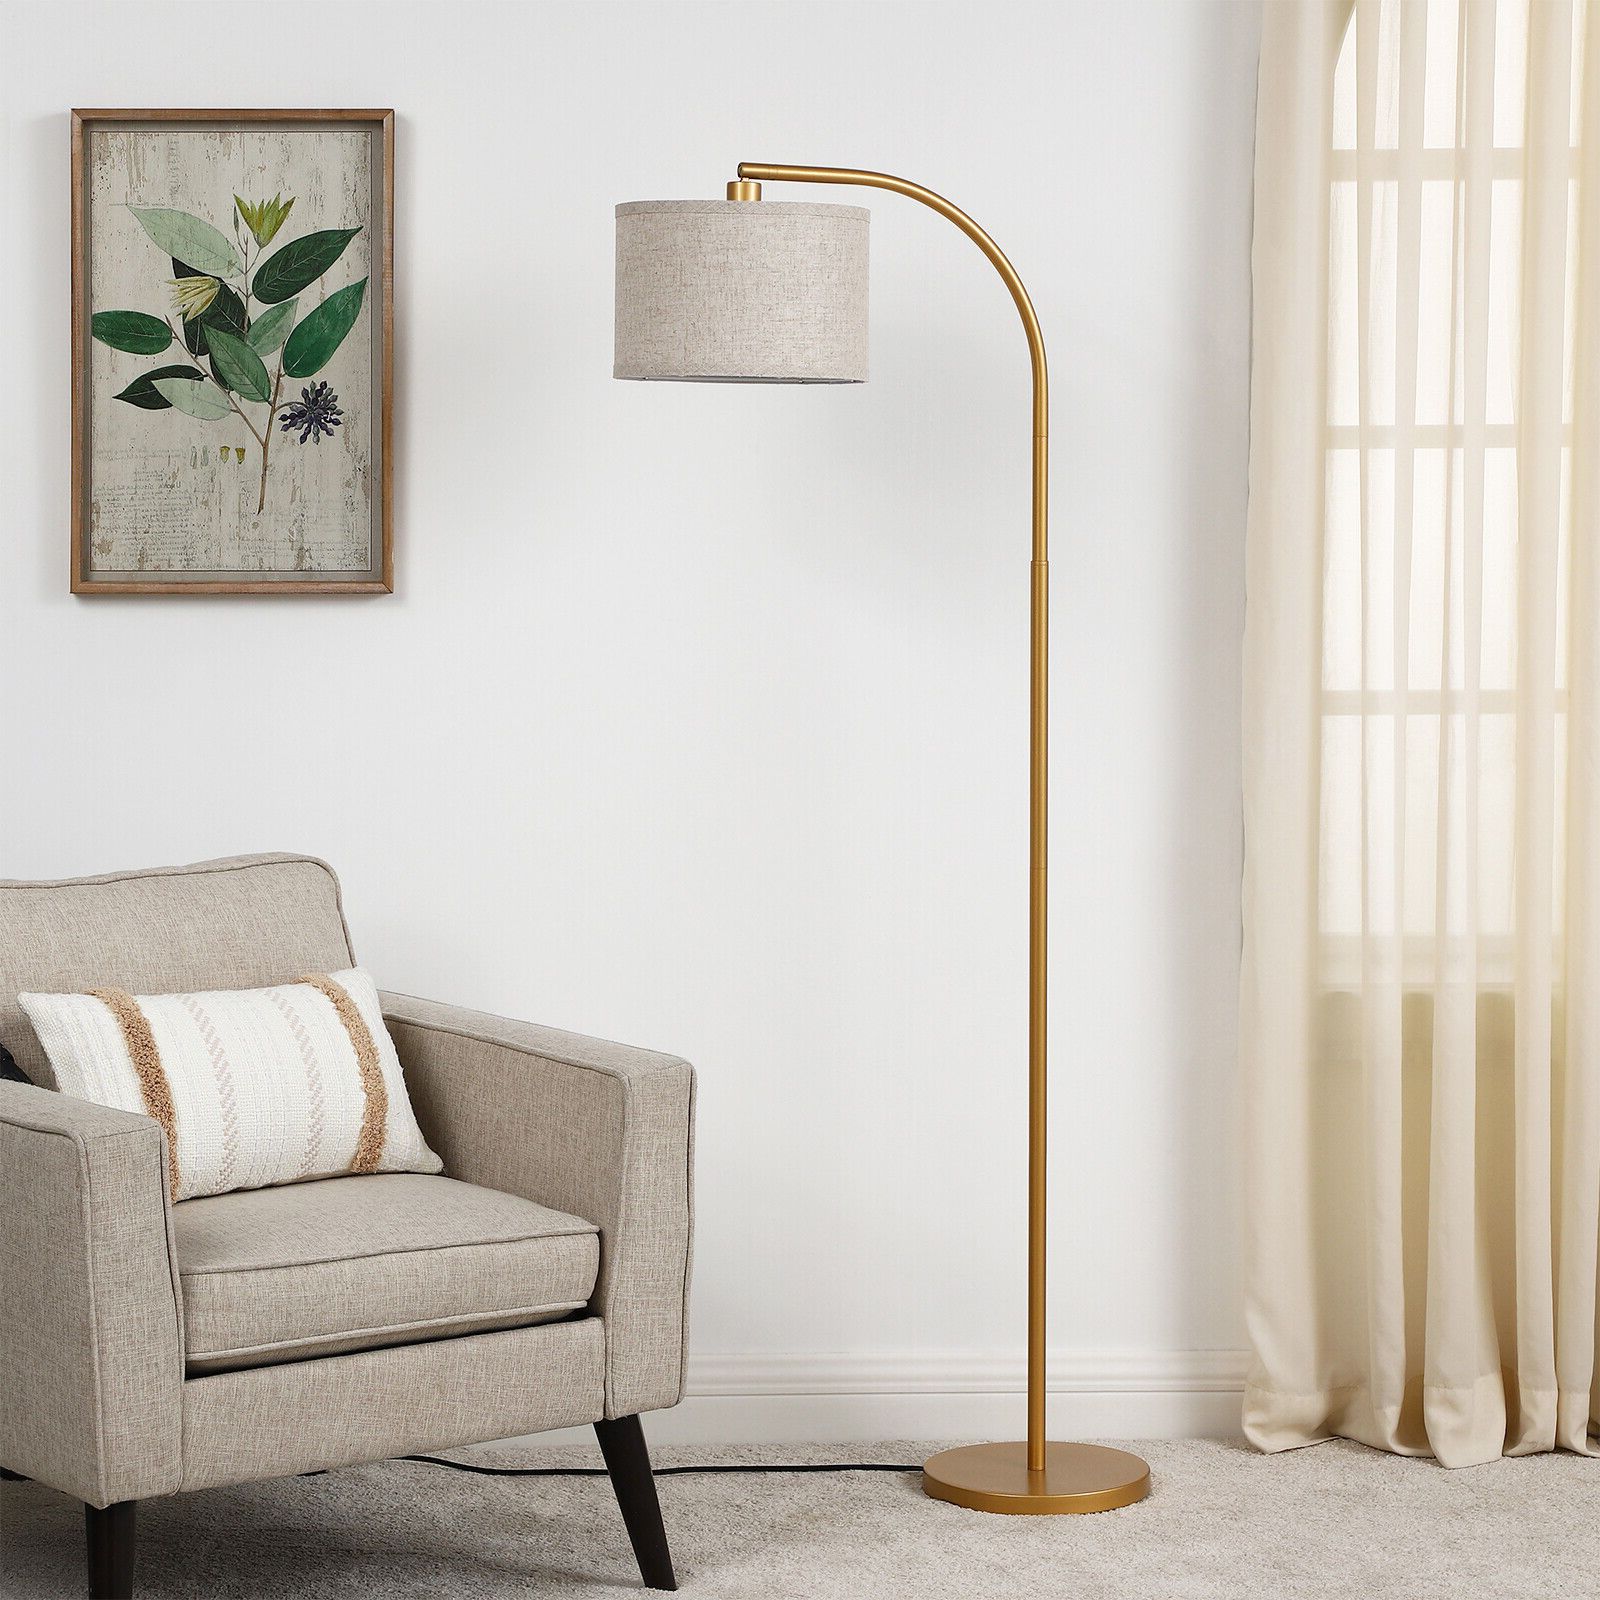 Gold Standing Lamps With Fashionable Dewenwils Modern Arched Floor Lamps Adjustable Gold Standing Tall Arc Lamp (View 10 of 10)